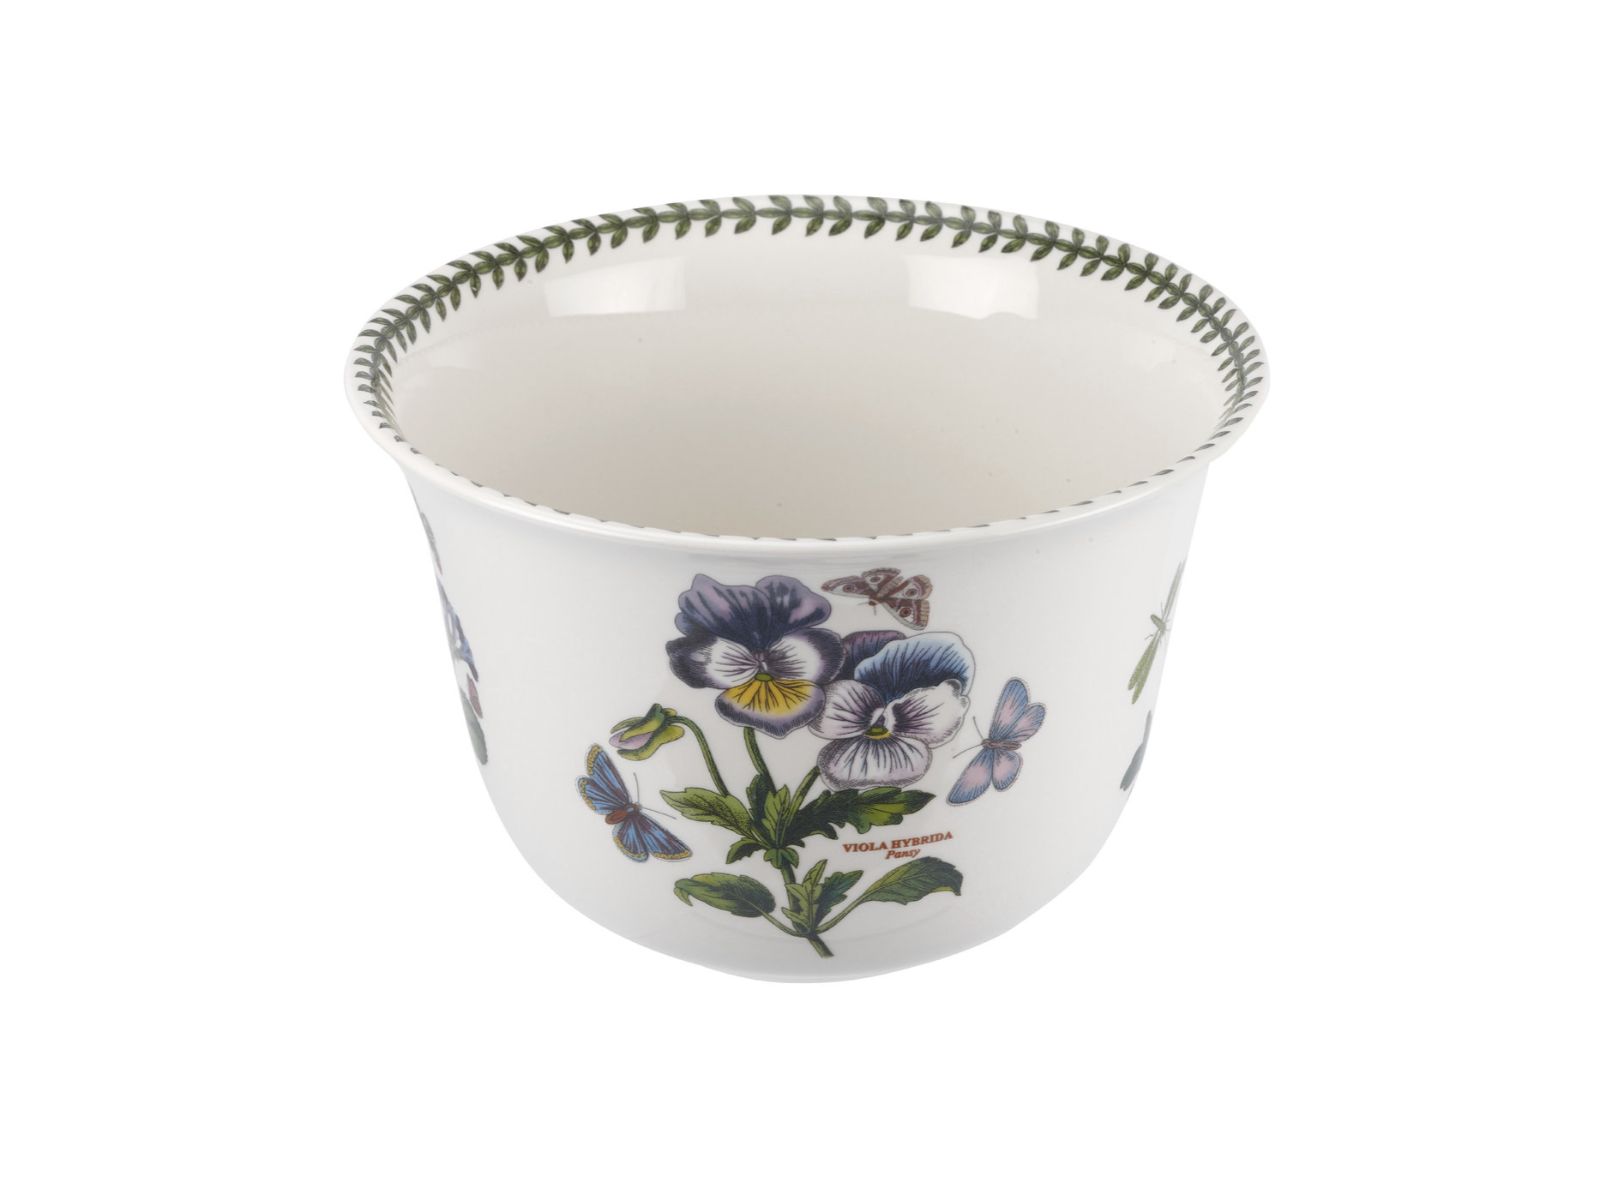 A white porcelain flower pot with a green laurel wreath trim and four floral designs on the outside